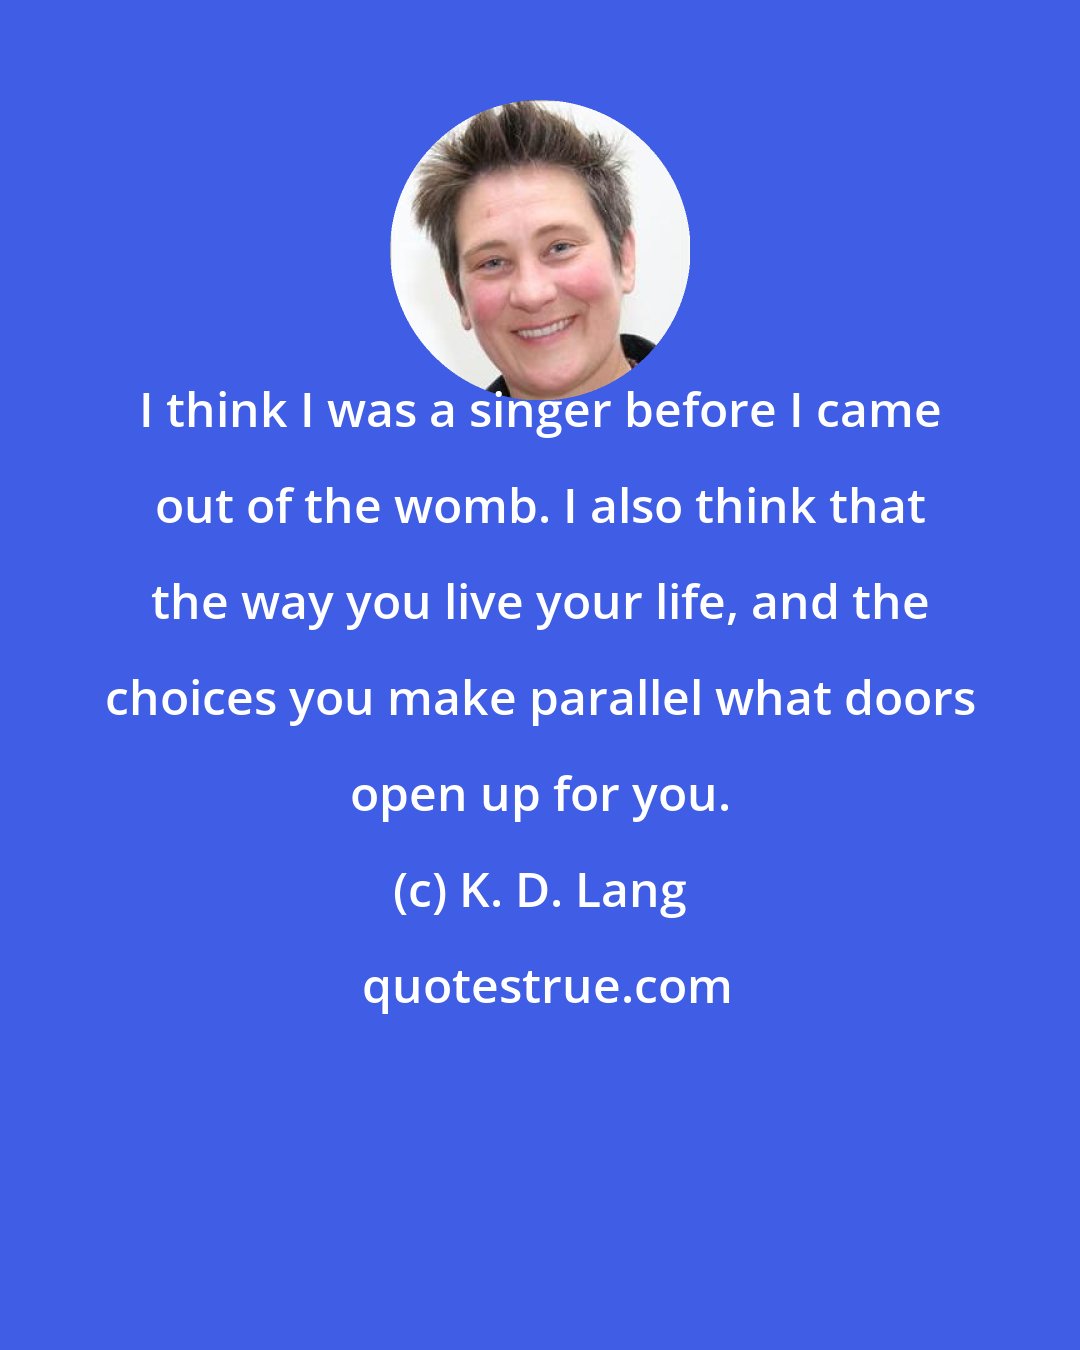 K. D. Lang: I think I was a singer before I came out of the womb. I also think that the way you live your life, and the choices you make parallel what doors open up for you.